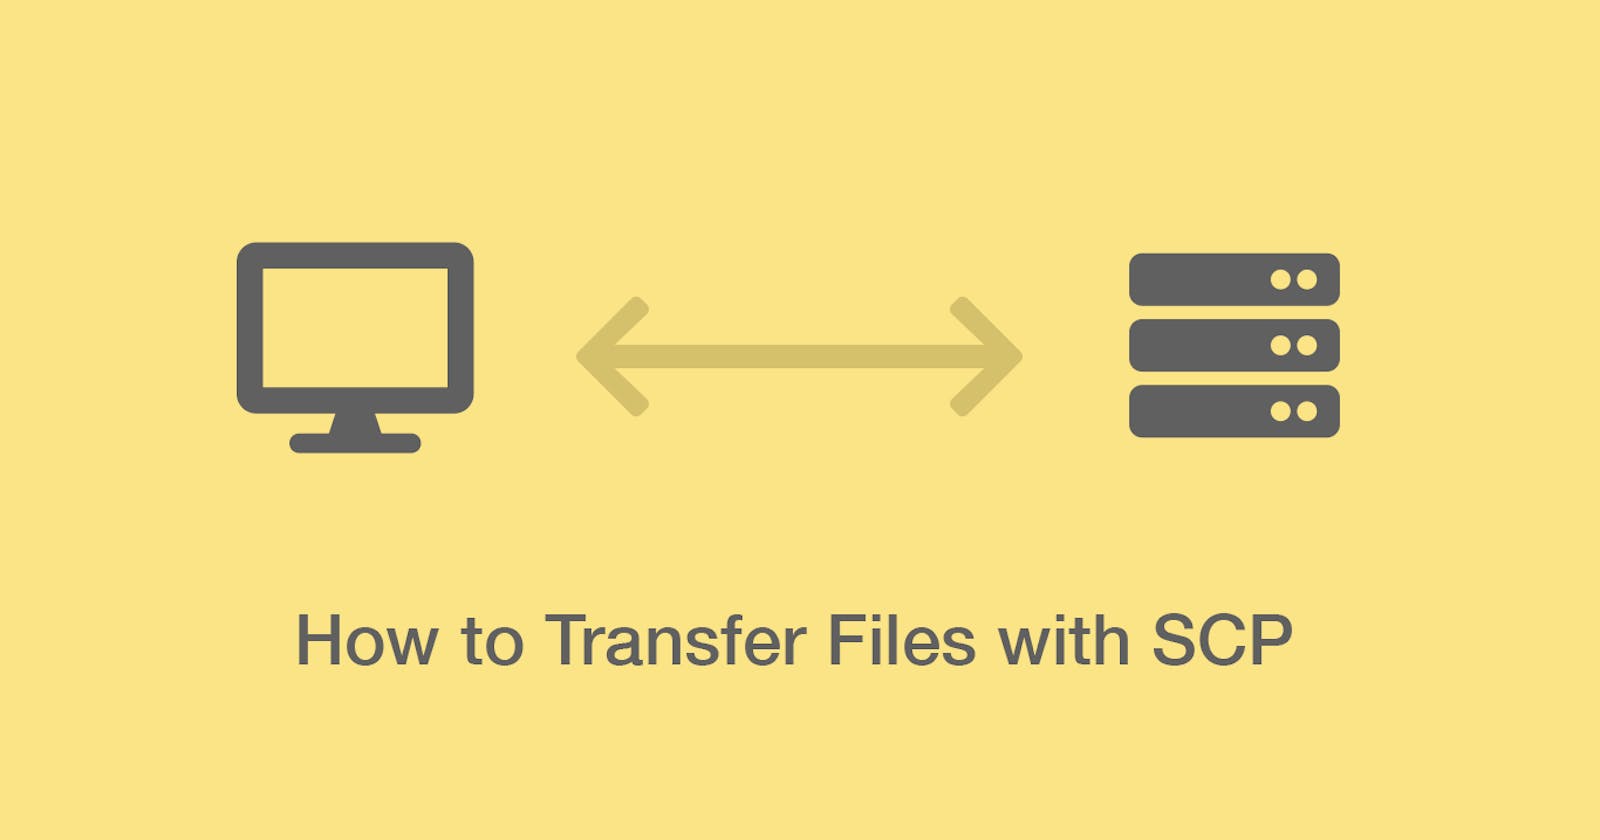 How to Send Files / Folders from Local PC to Remote Server ? (Using SCP)